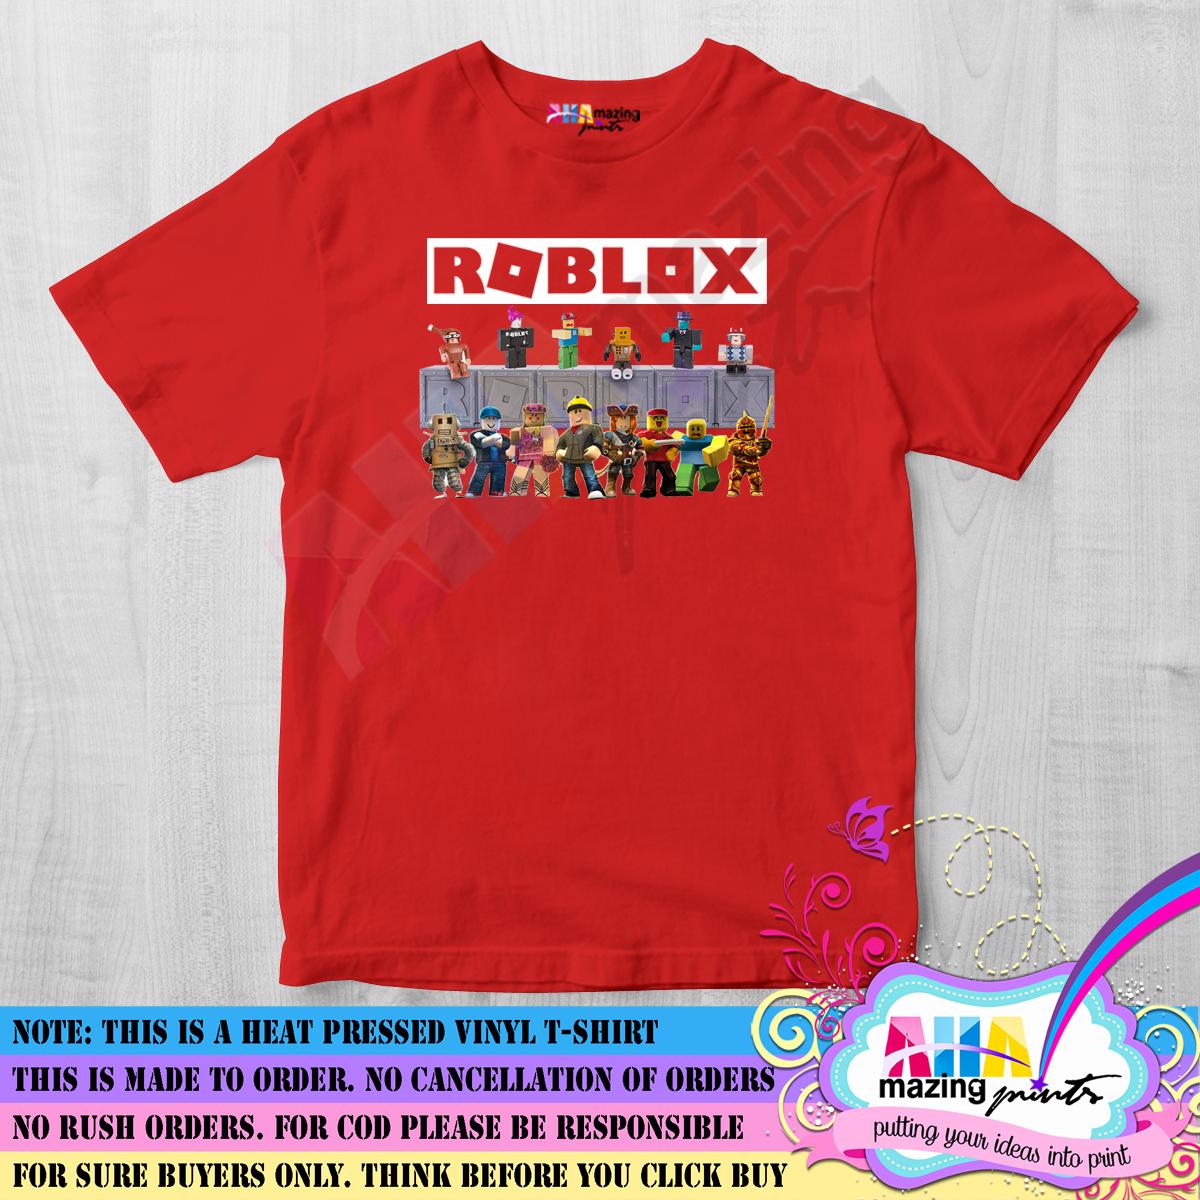 Roblox T Shirt Comfortable Pure Cotton Short Sleeve Fashion Printed T Shirt Round Neck Casual Top - teakettle shirt or decal roblox